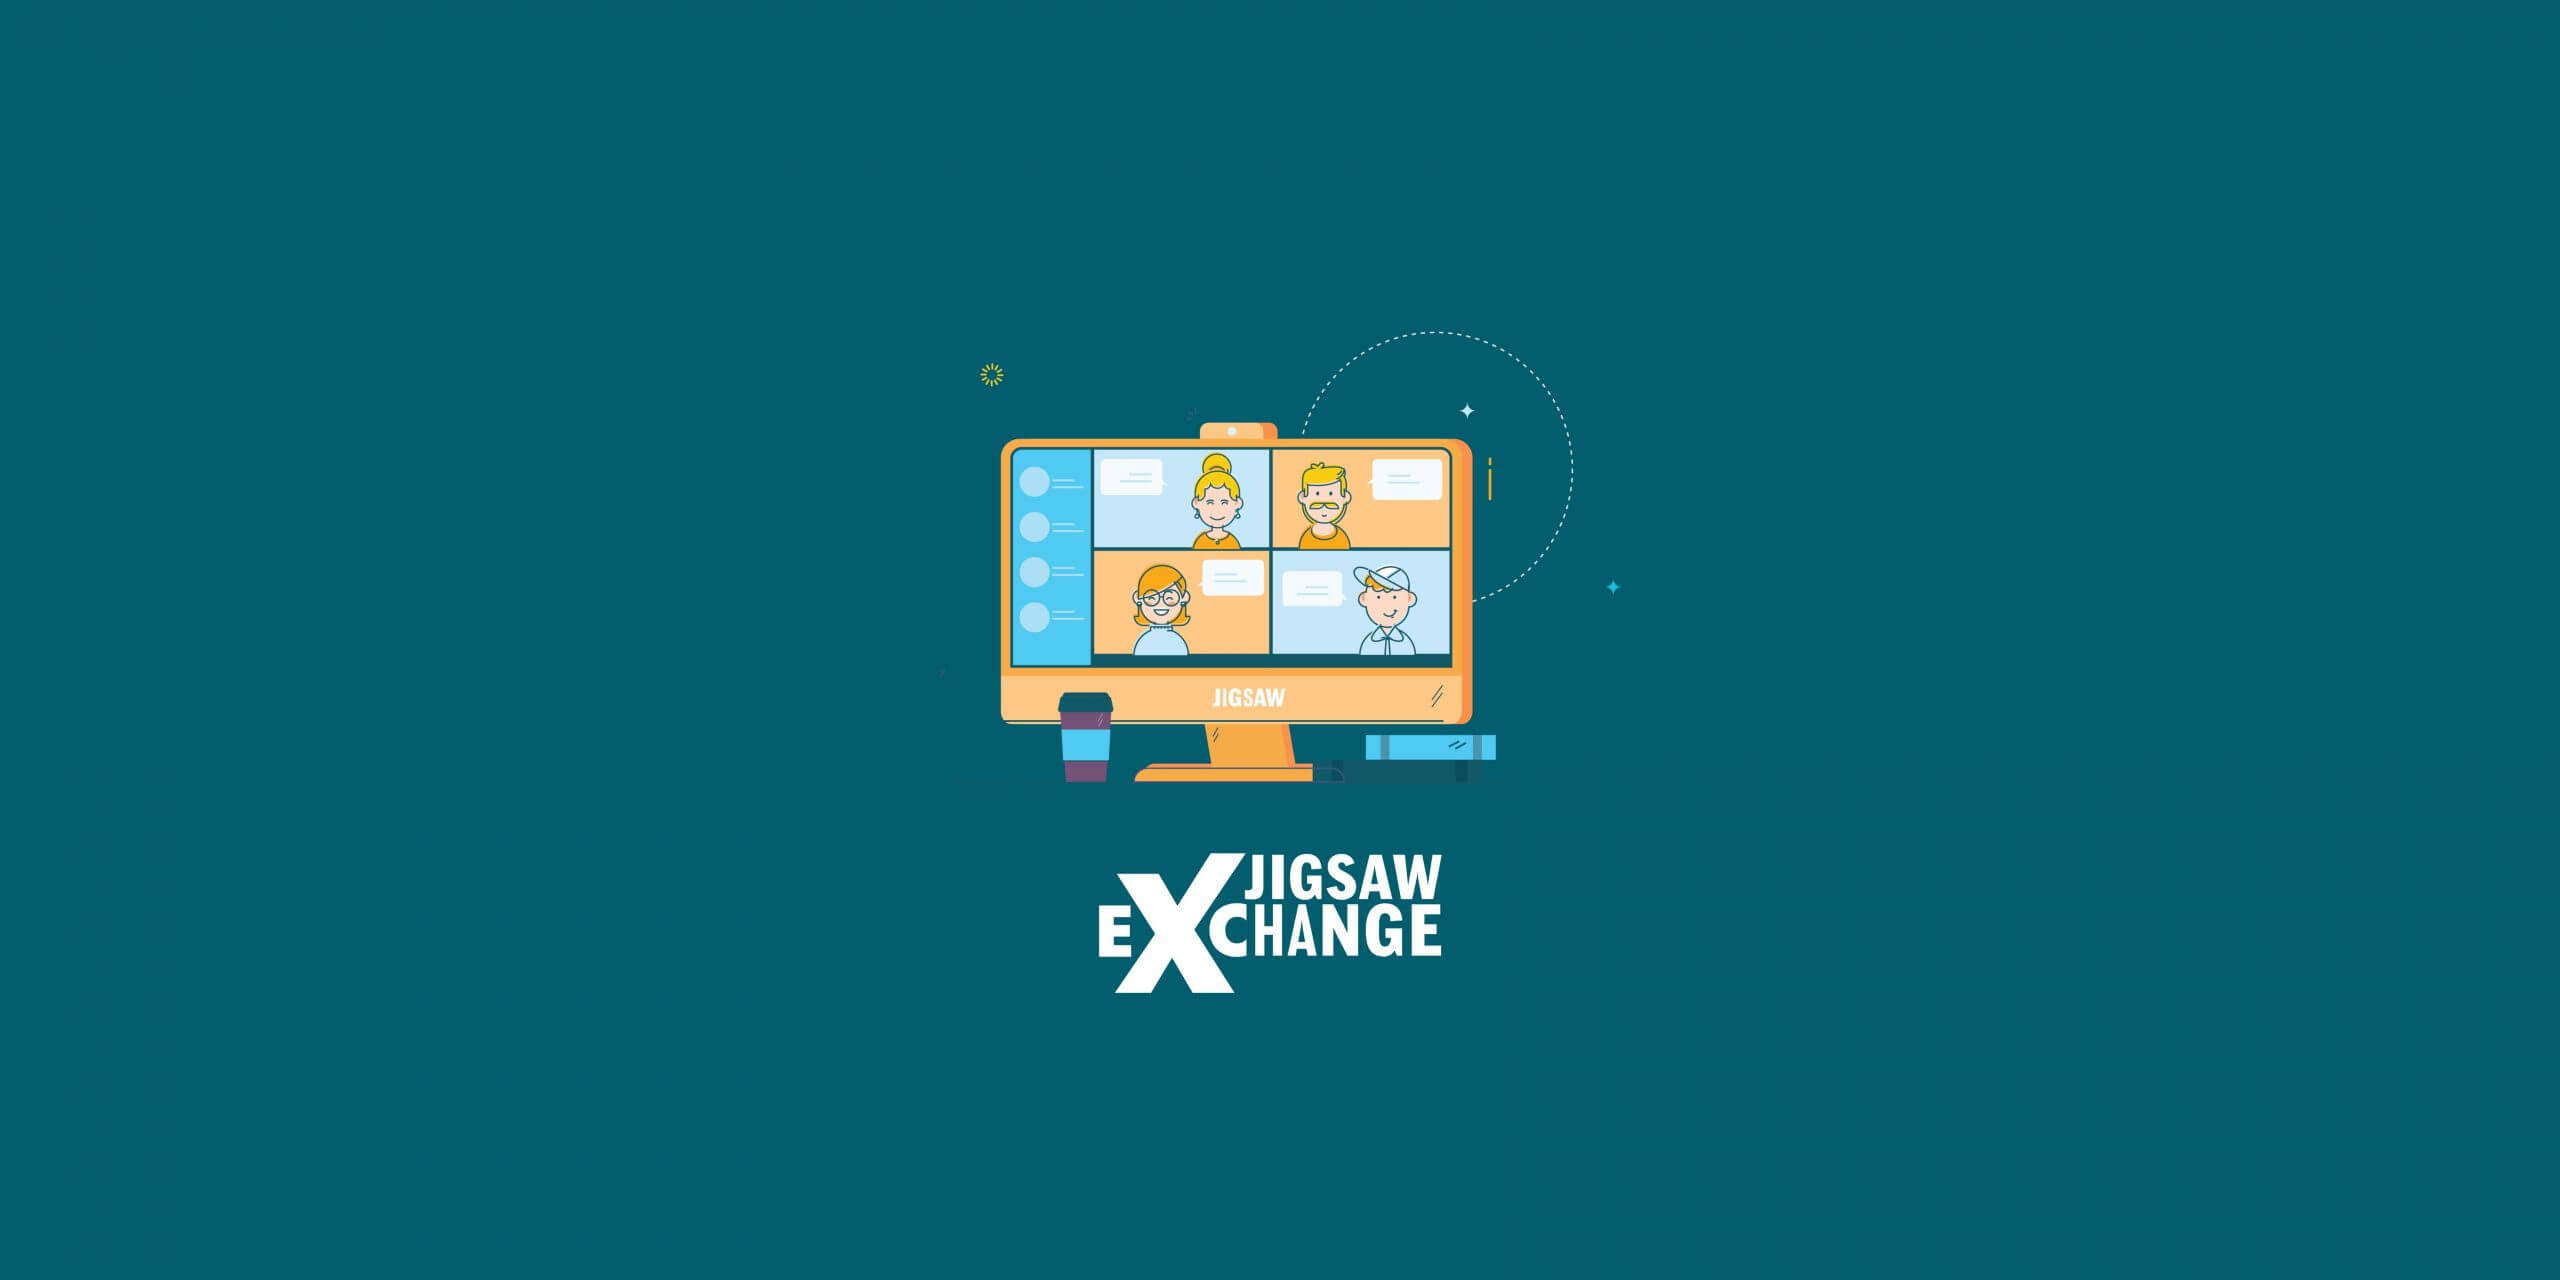 Banner image for Jigsaw Exchange research event